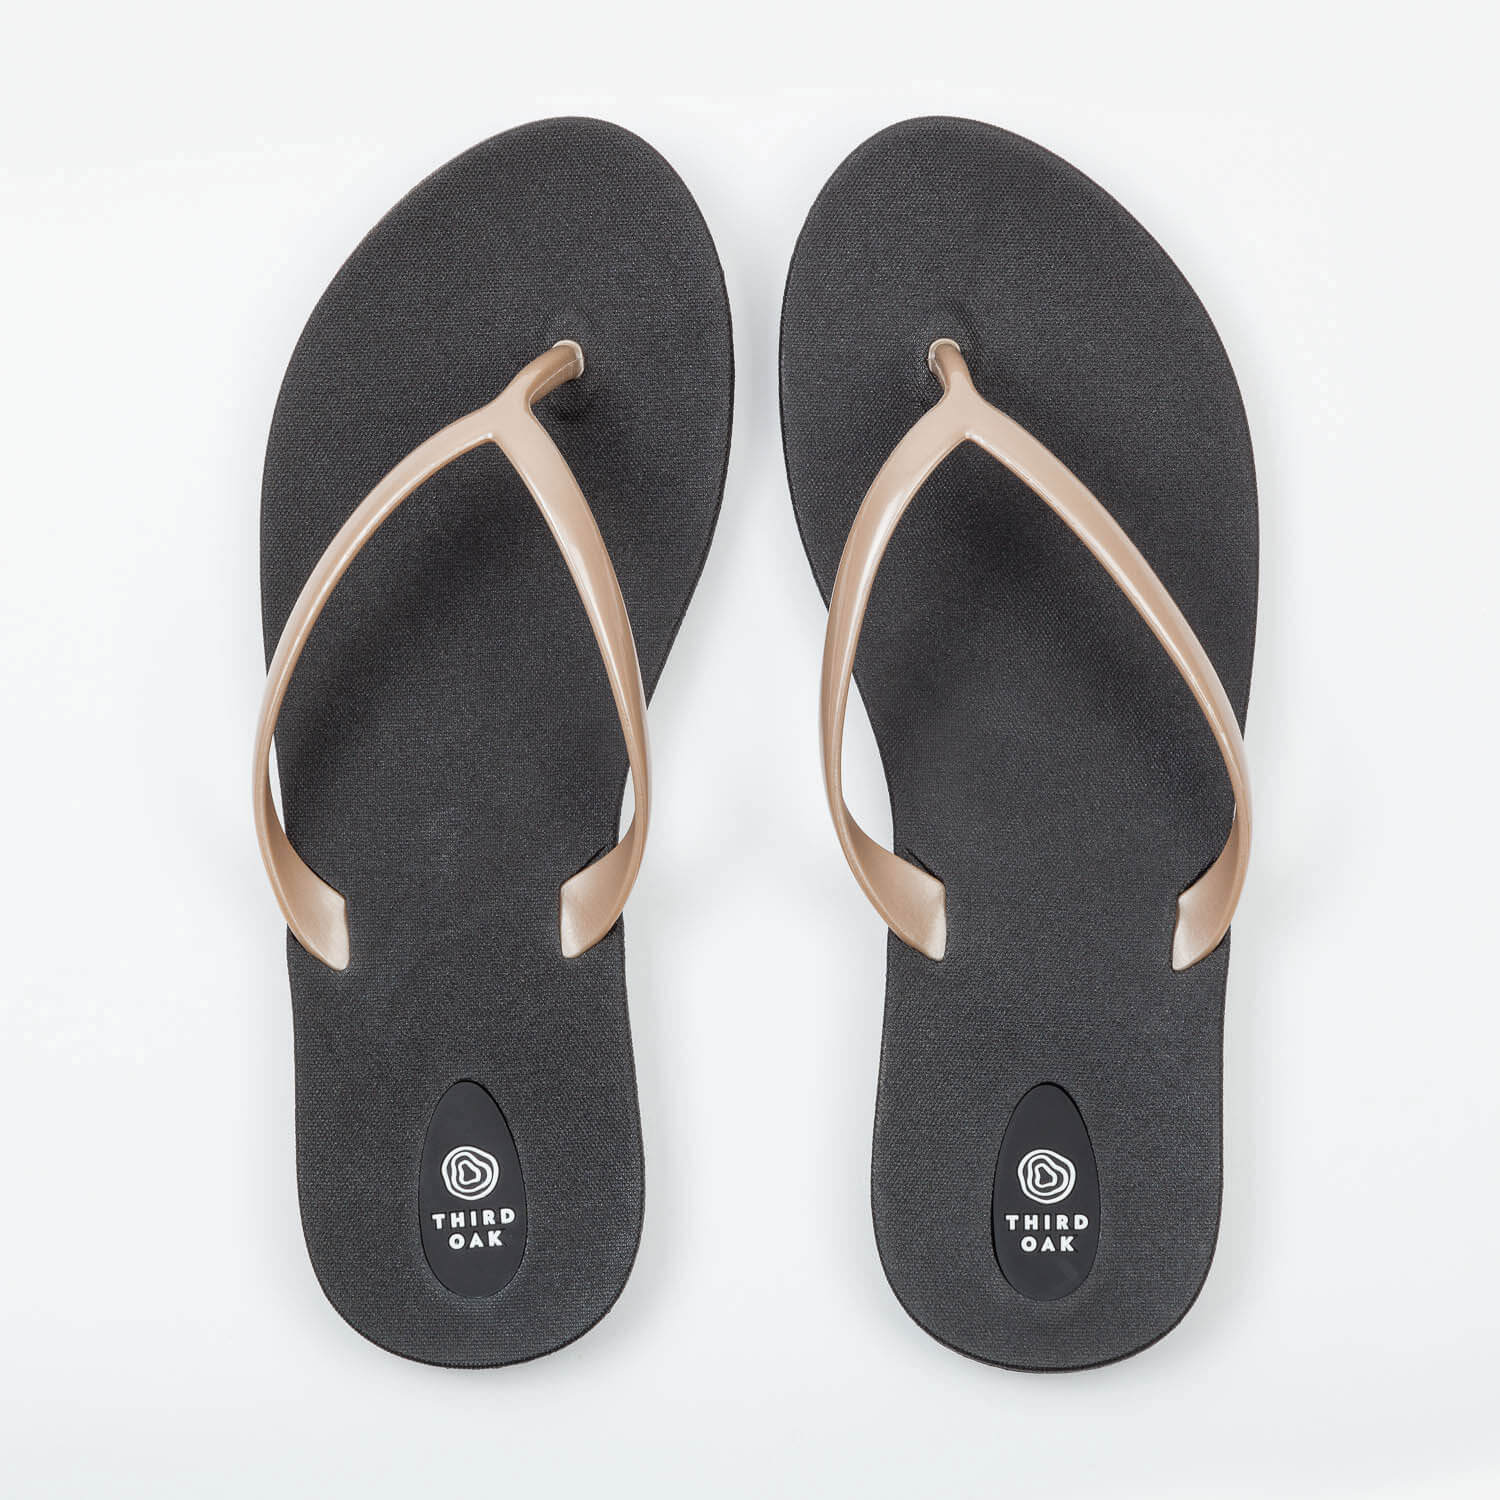 Surf | Comfortable Recyclable Men's Flip Flops | Made in USA